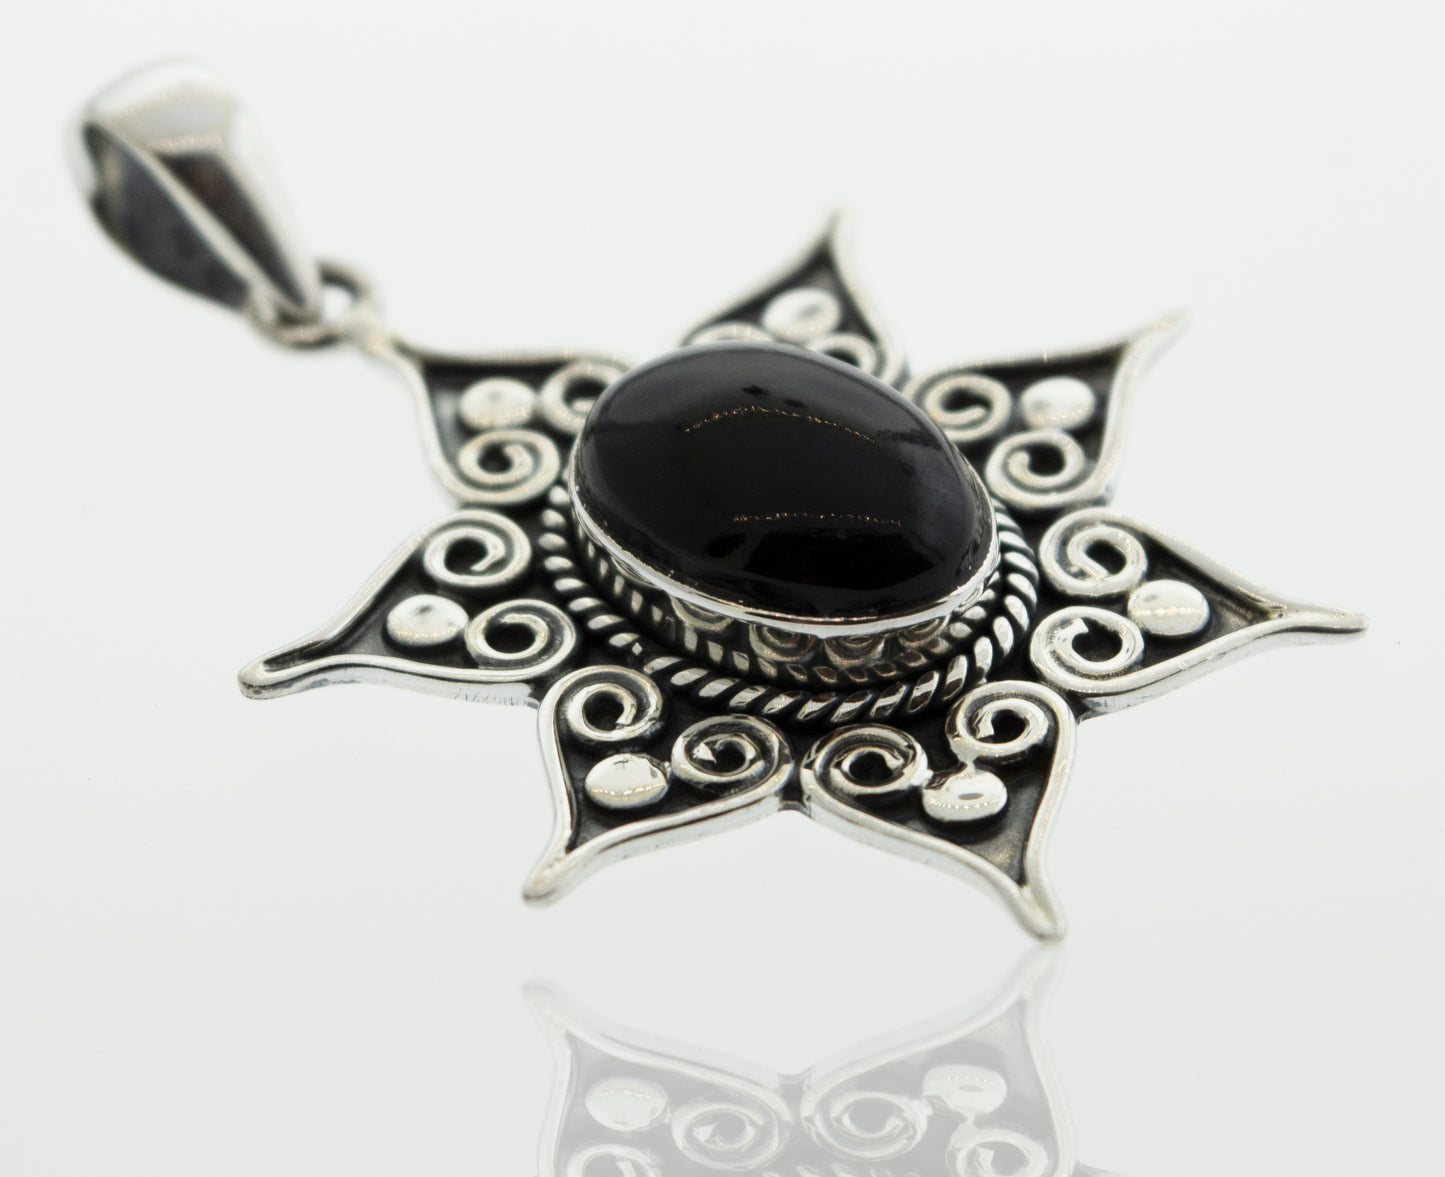 A sleek silver Super Silver Onyx Pendant with a black onyx stone, adorned with a spiral and rope border for an elegant touch.